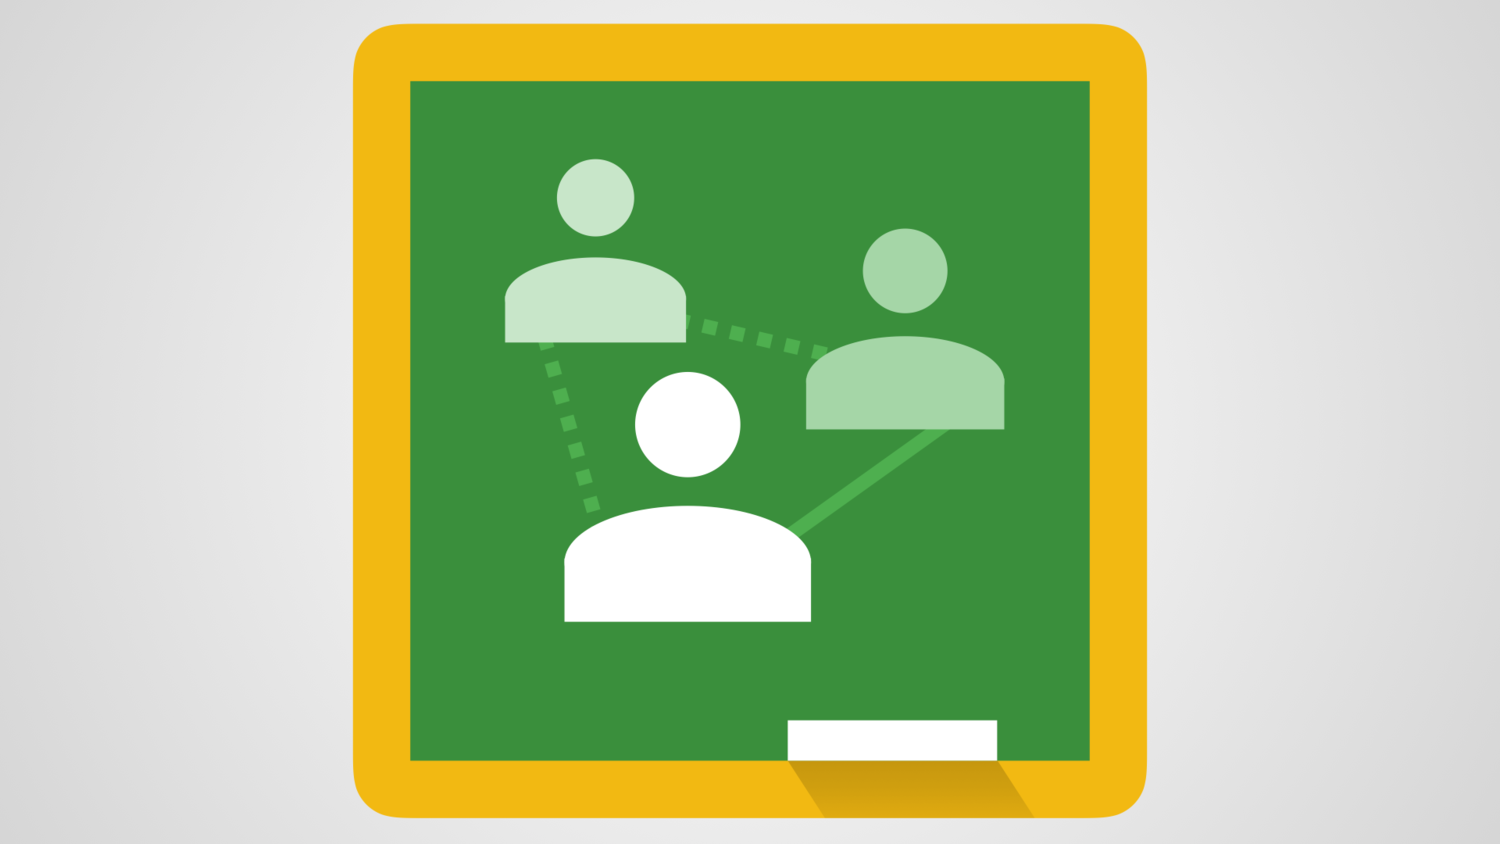 Google Classroom For Professional Learning Learning In Hand With